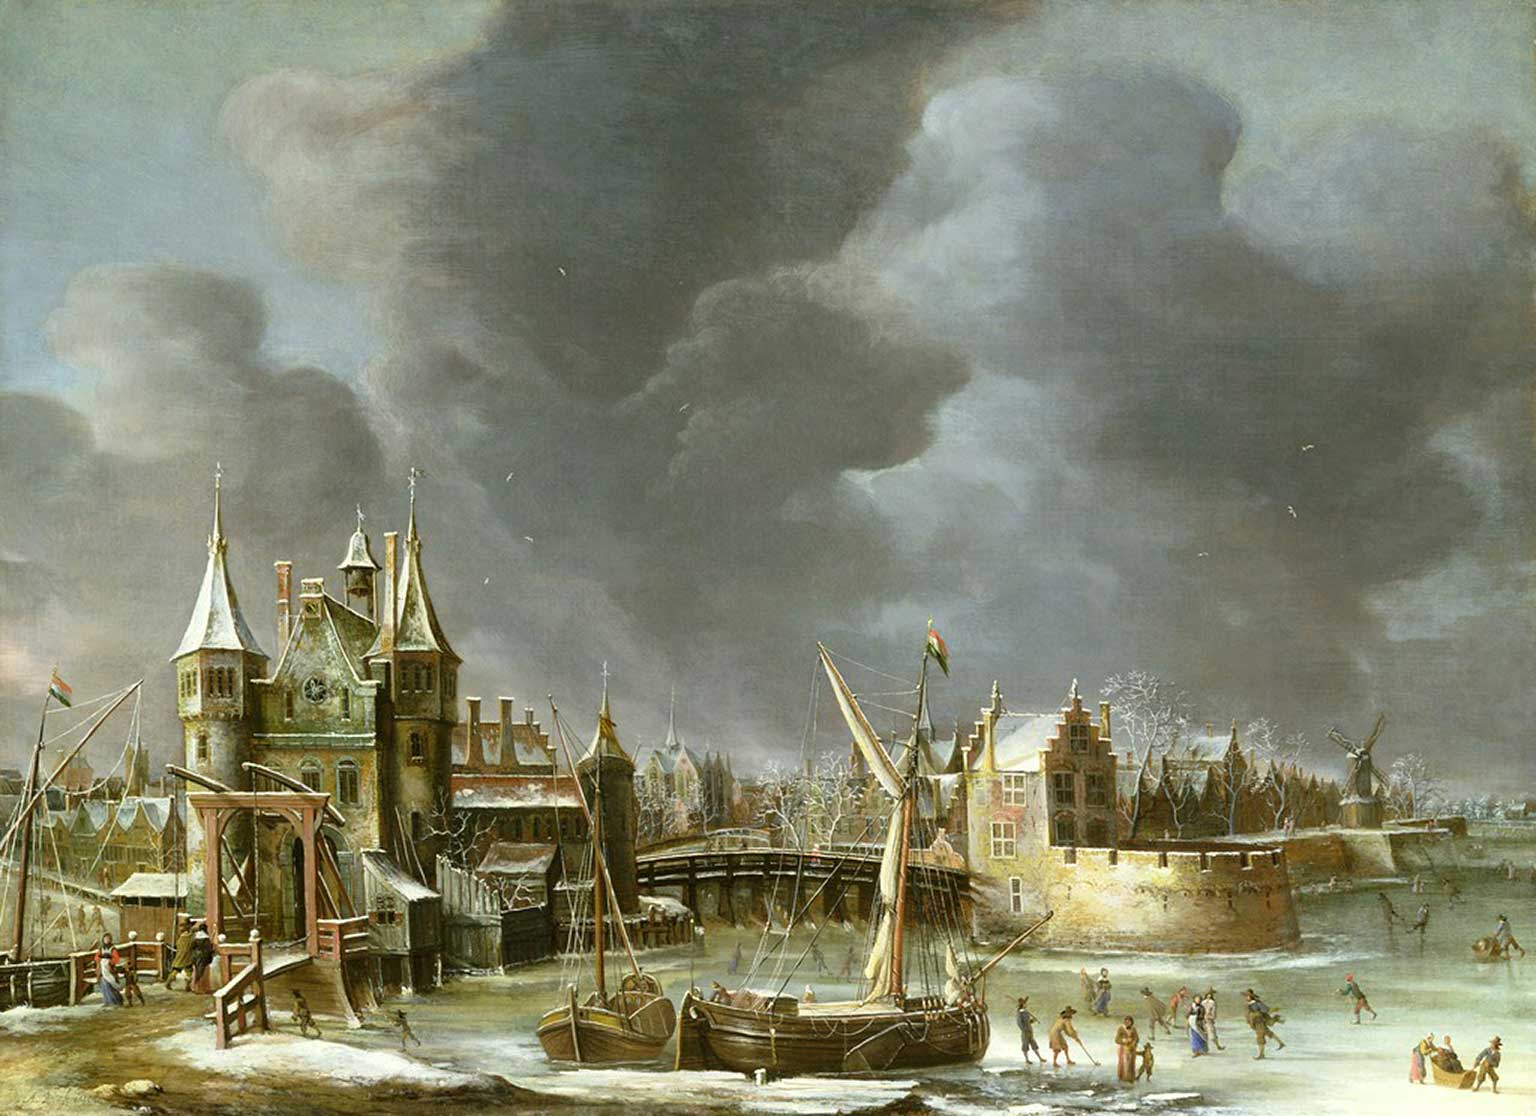 Old Regulierspoort in Amsterdam during winter, painting from 1650 by Abraham Beerstraten